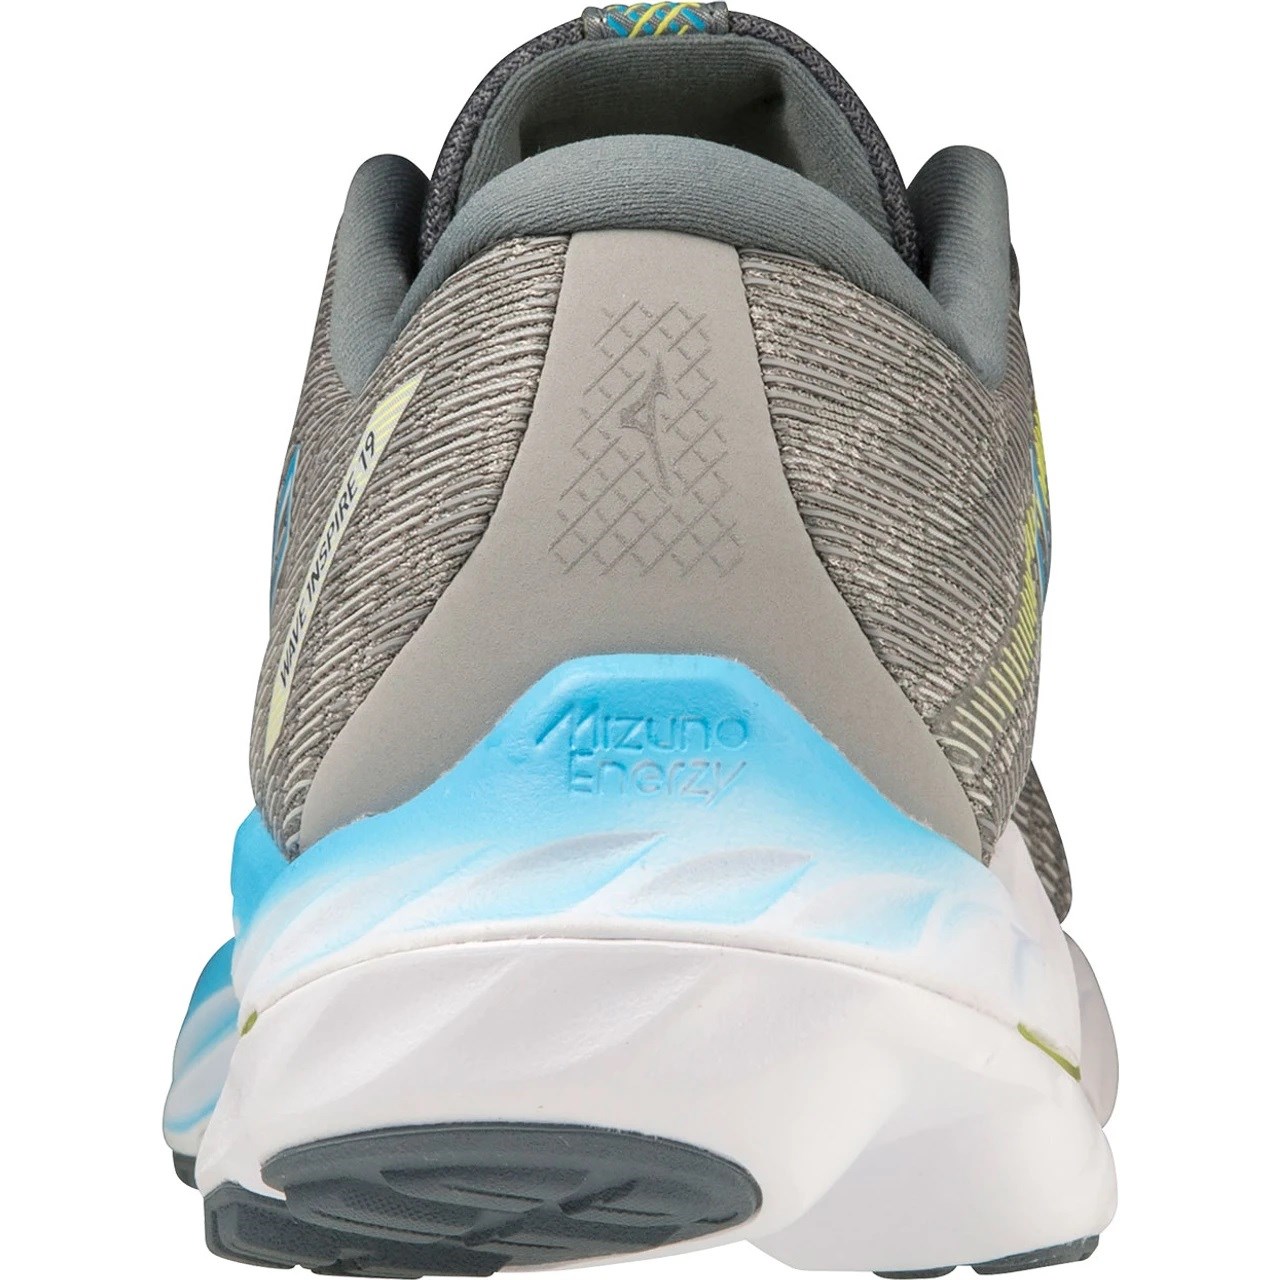 Mizuno Wave Inspire 19 - Mens Running Shoes - Ultimate Grey/Jet Blue ...